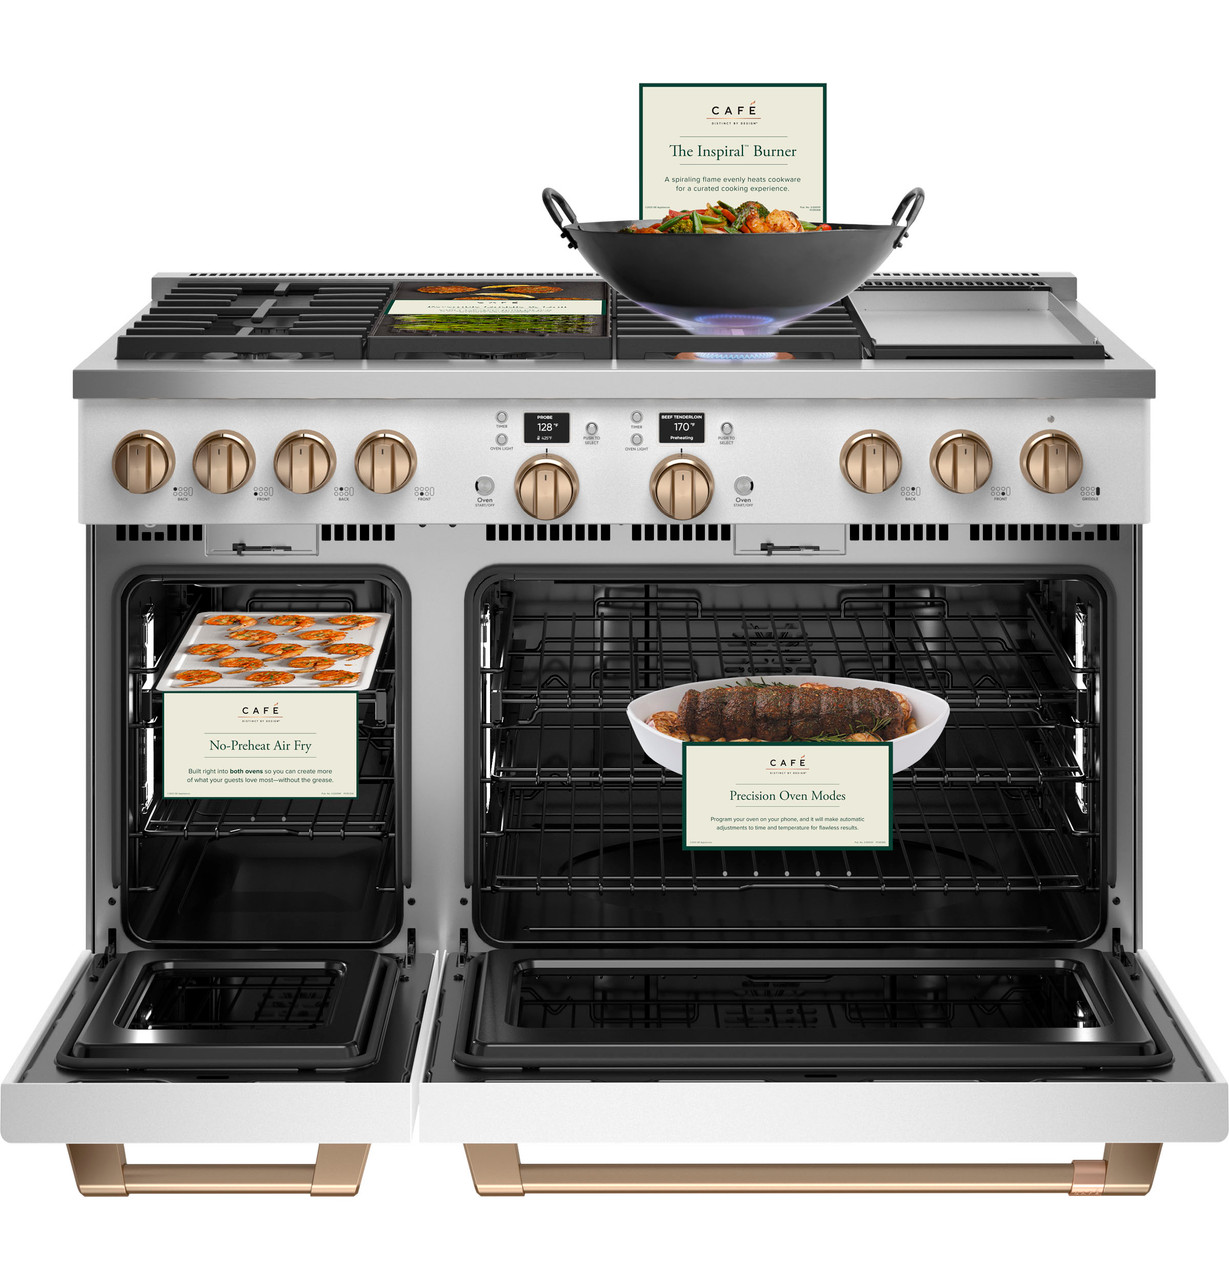 48 Commercial Gas Range with Convection Oven, 2 Open-top Burners and 36  Thermostatic Griddle